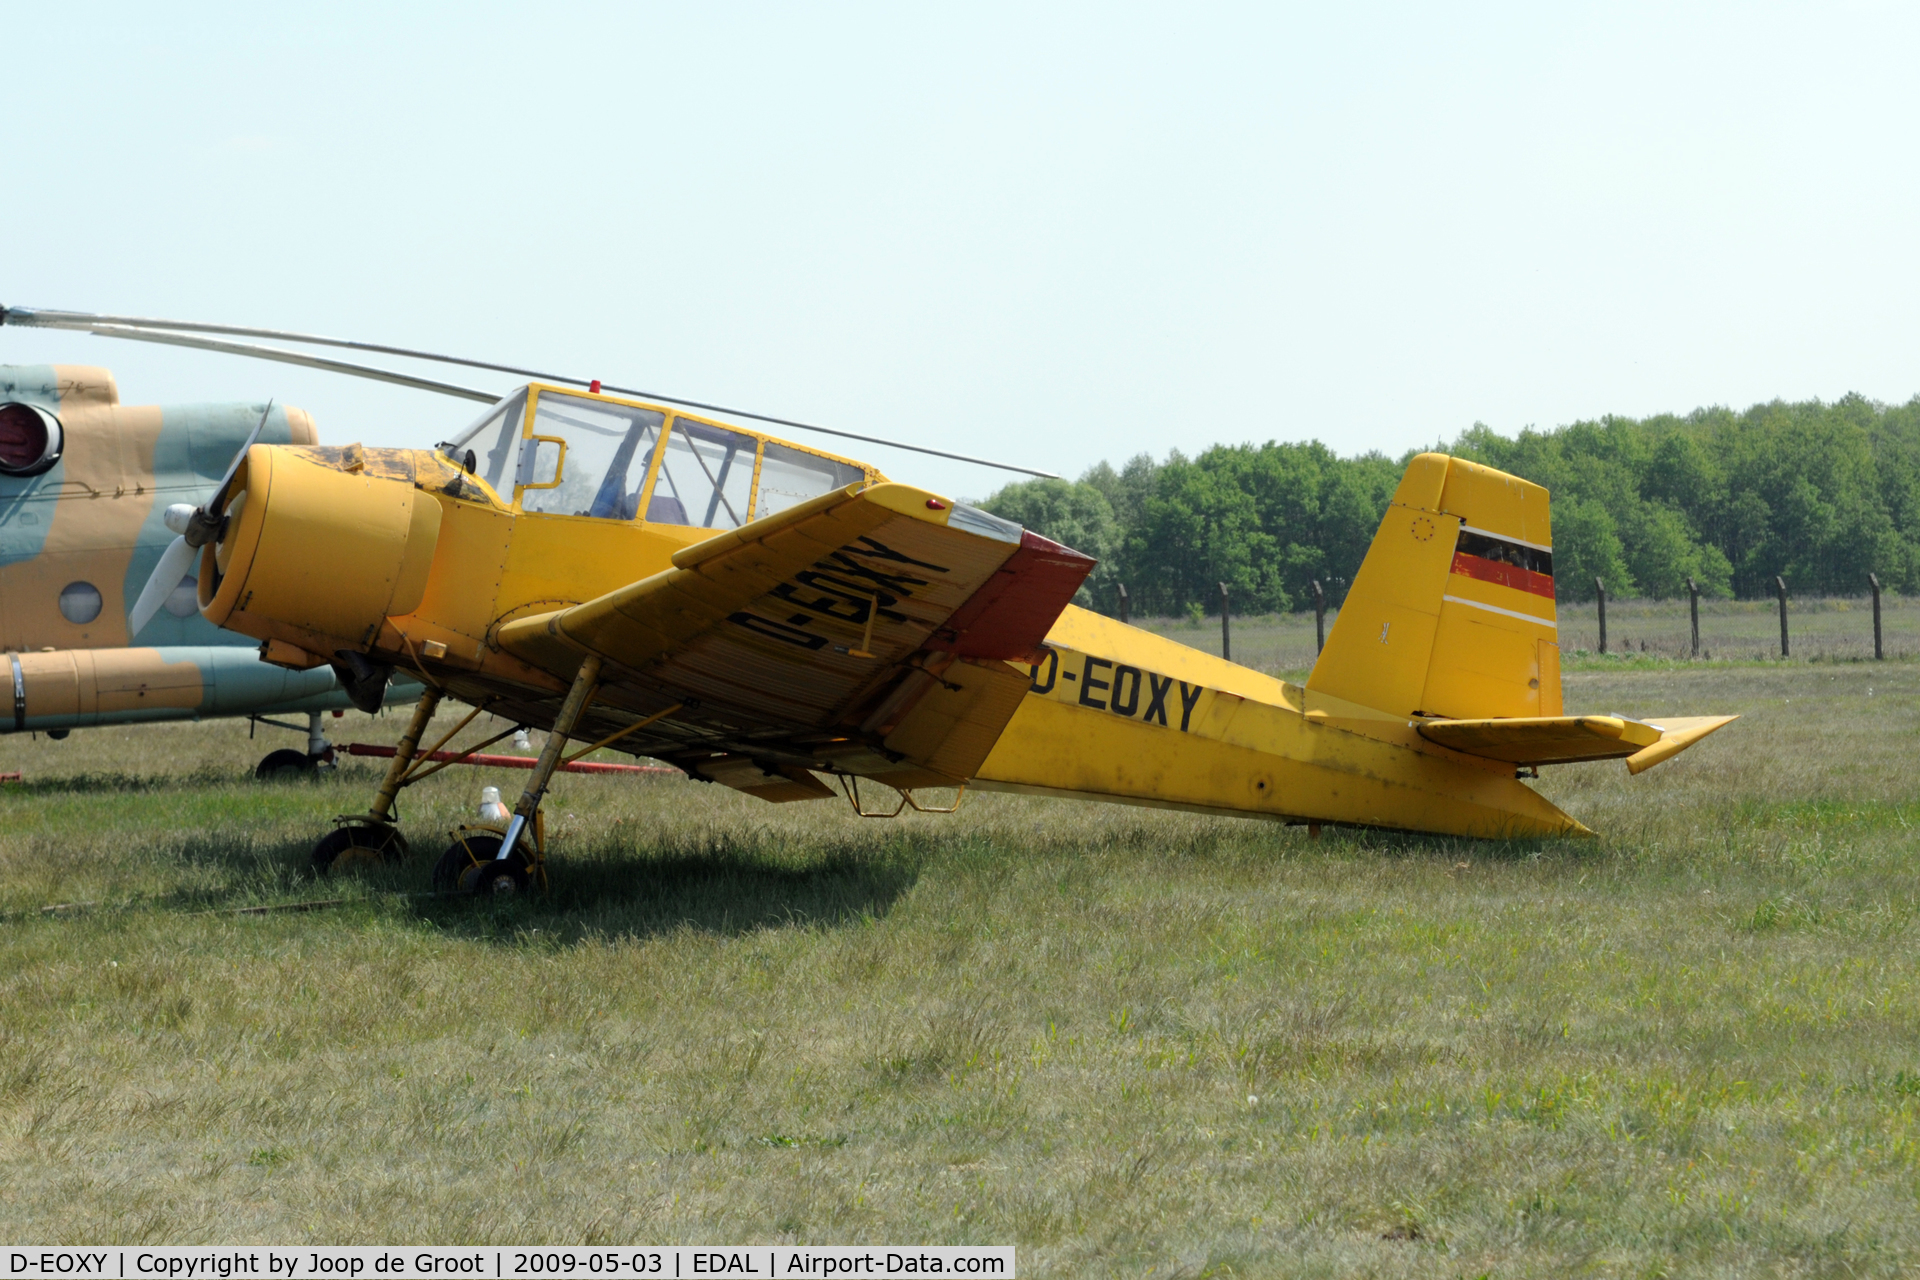 D-EOXY, Let Z-37A-2 Cmelak C/N 19-04, Interflug did use the Cmelak as cropduster out of Fürstenwalde. This example is now preserved on the civil side of this former air base.